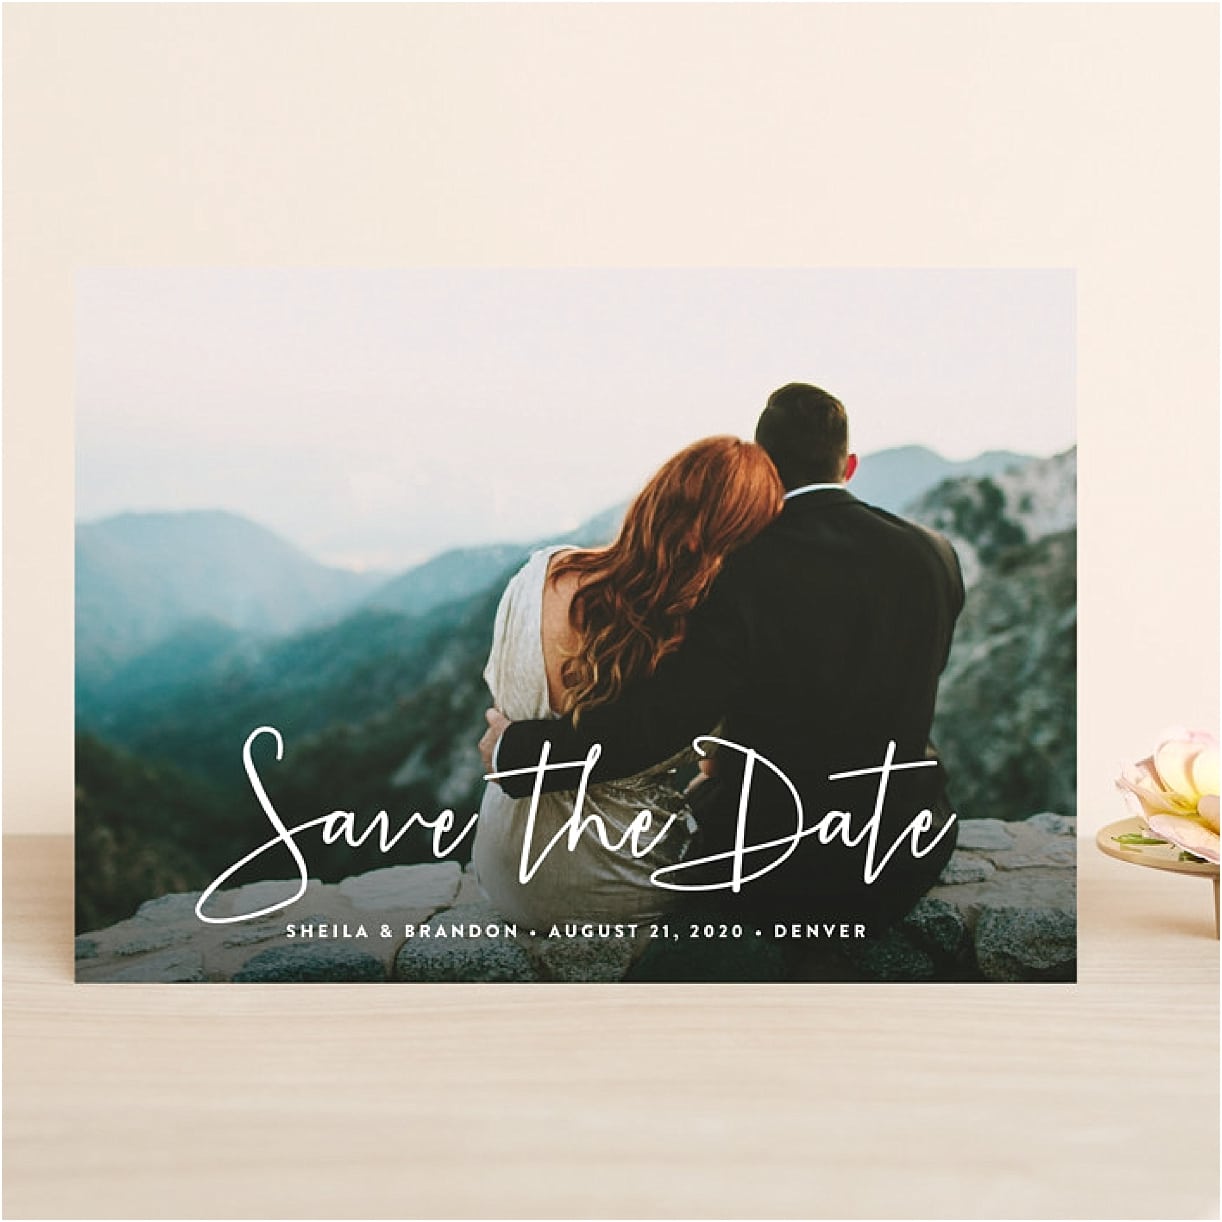 Wedding Save the Dates Ideas from Minted | Hill City Bride Virginia Weddings Blog